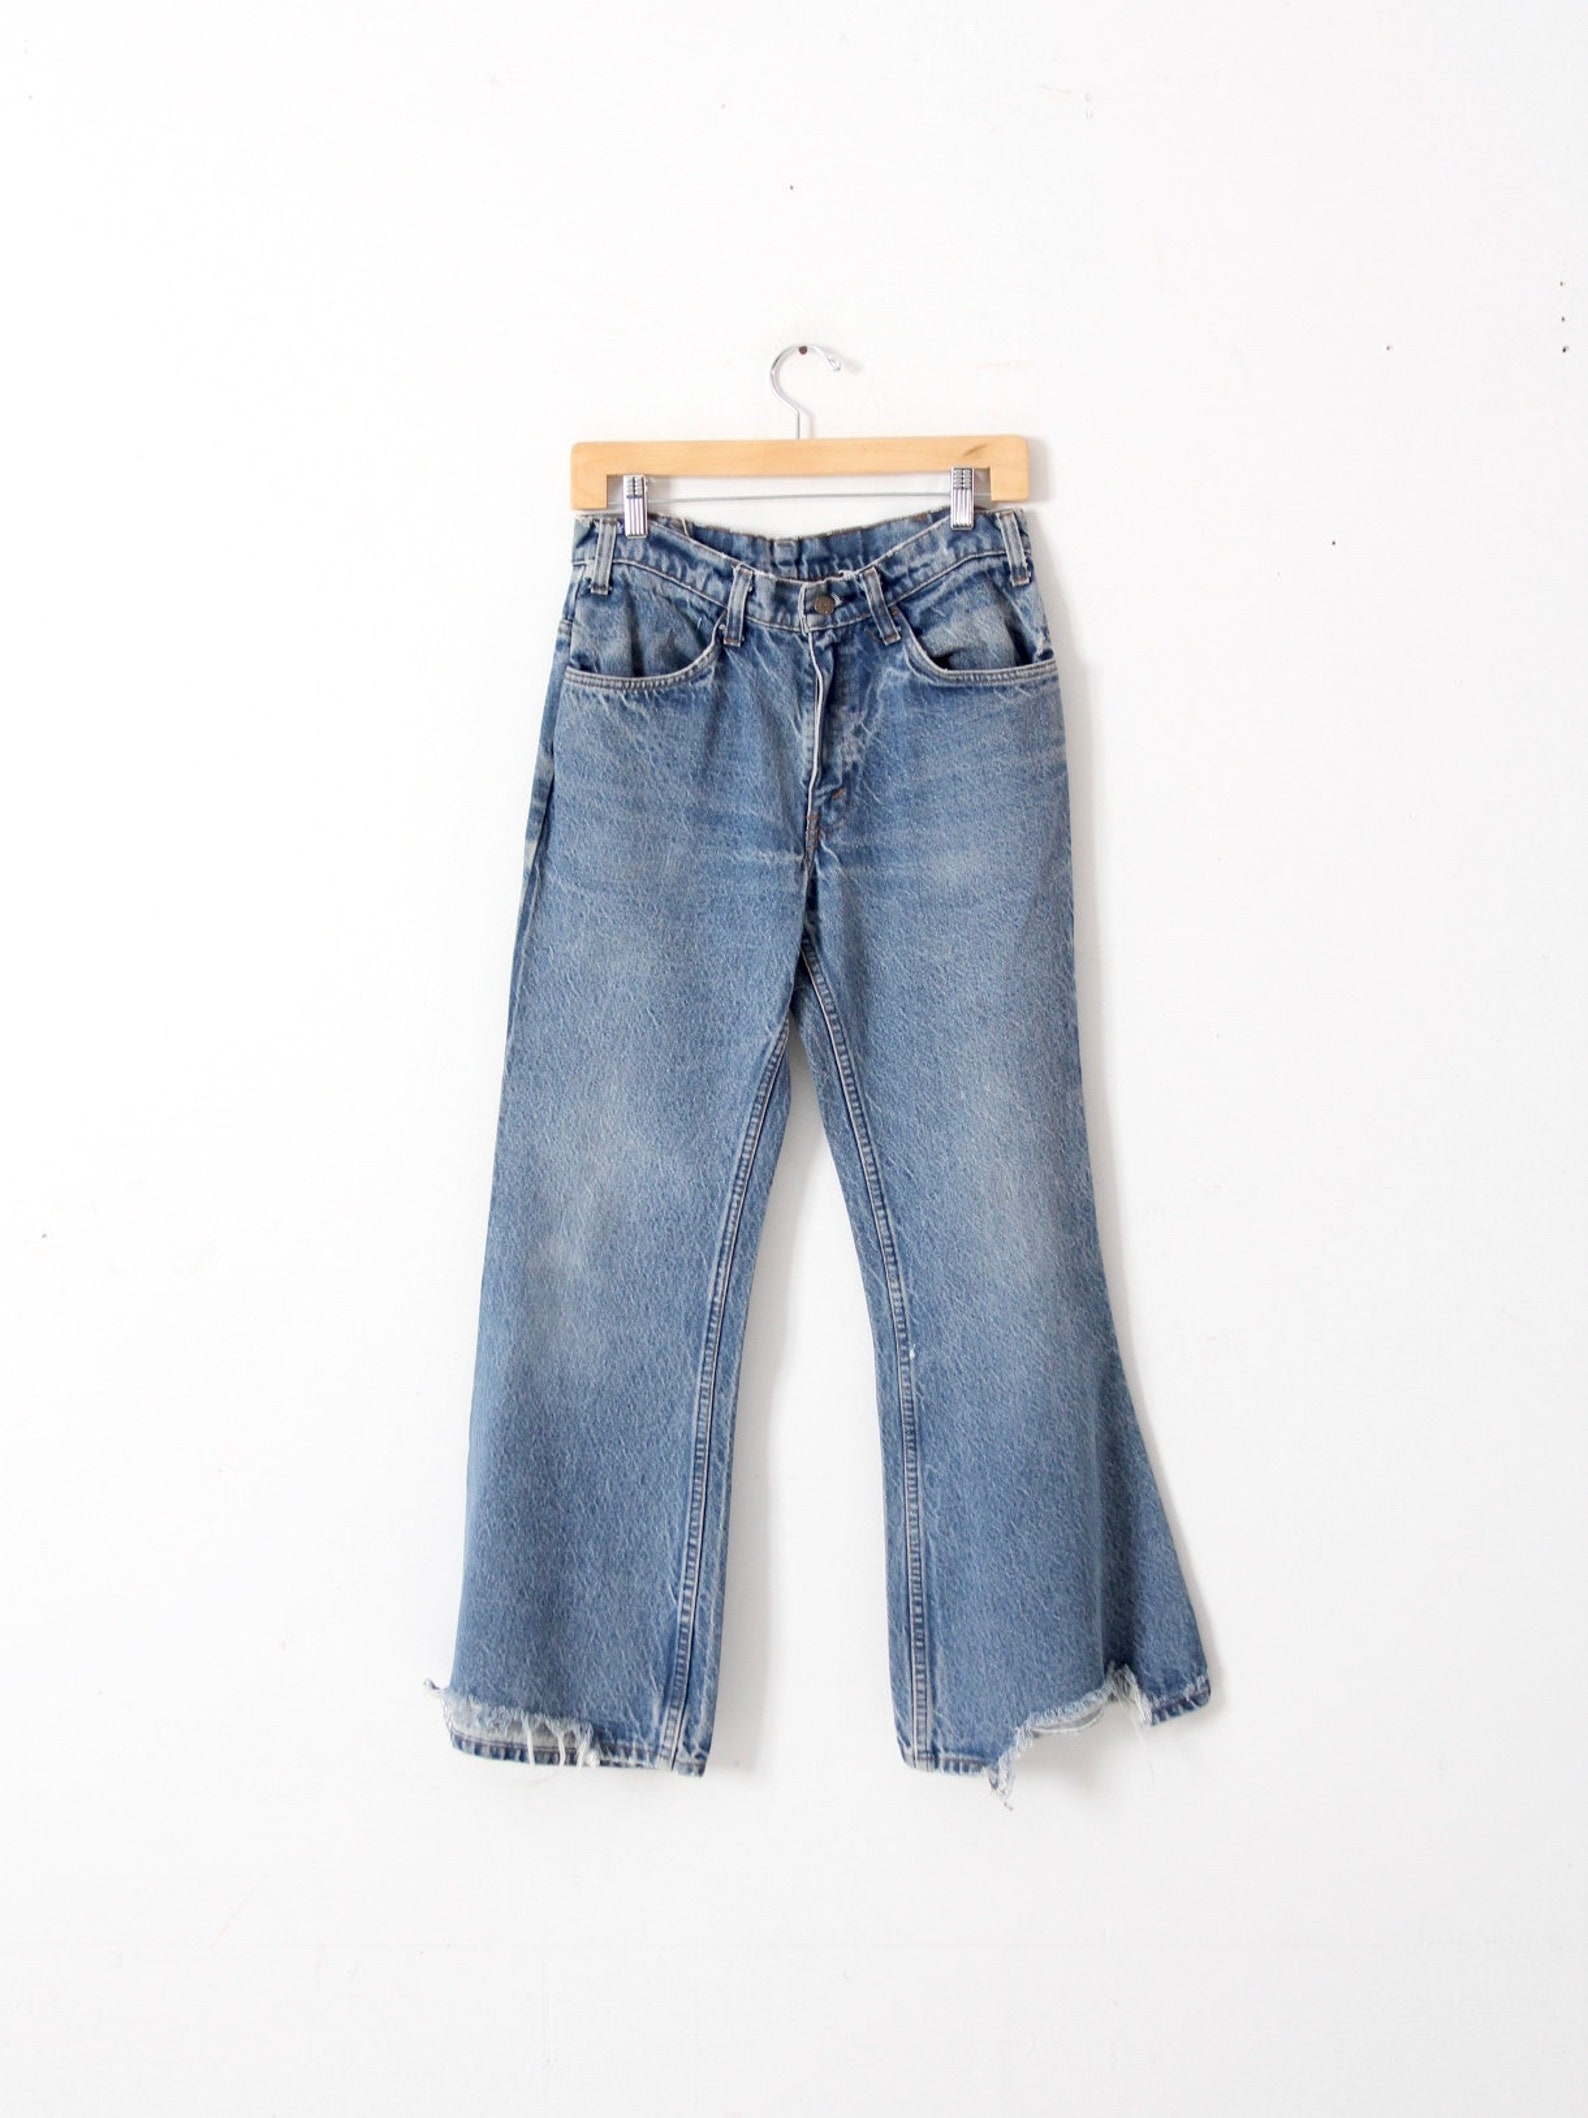 Levis 684 Jeans 1970s Levis Bell Bottoms Flares 30 X 28 - Etsy